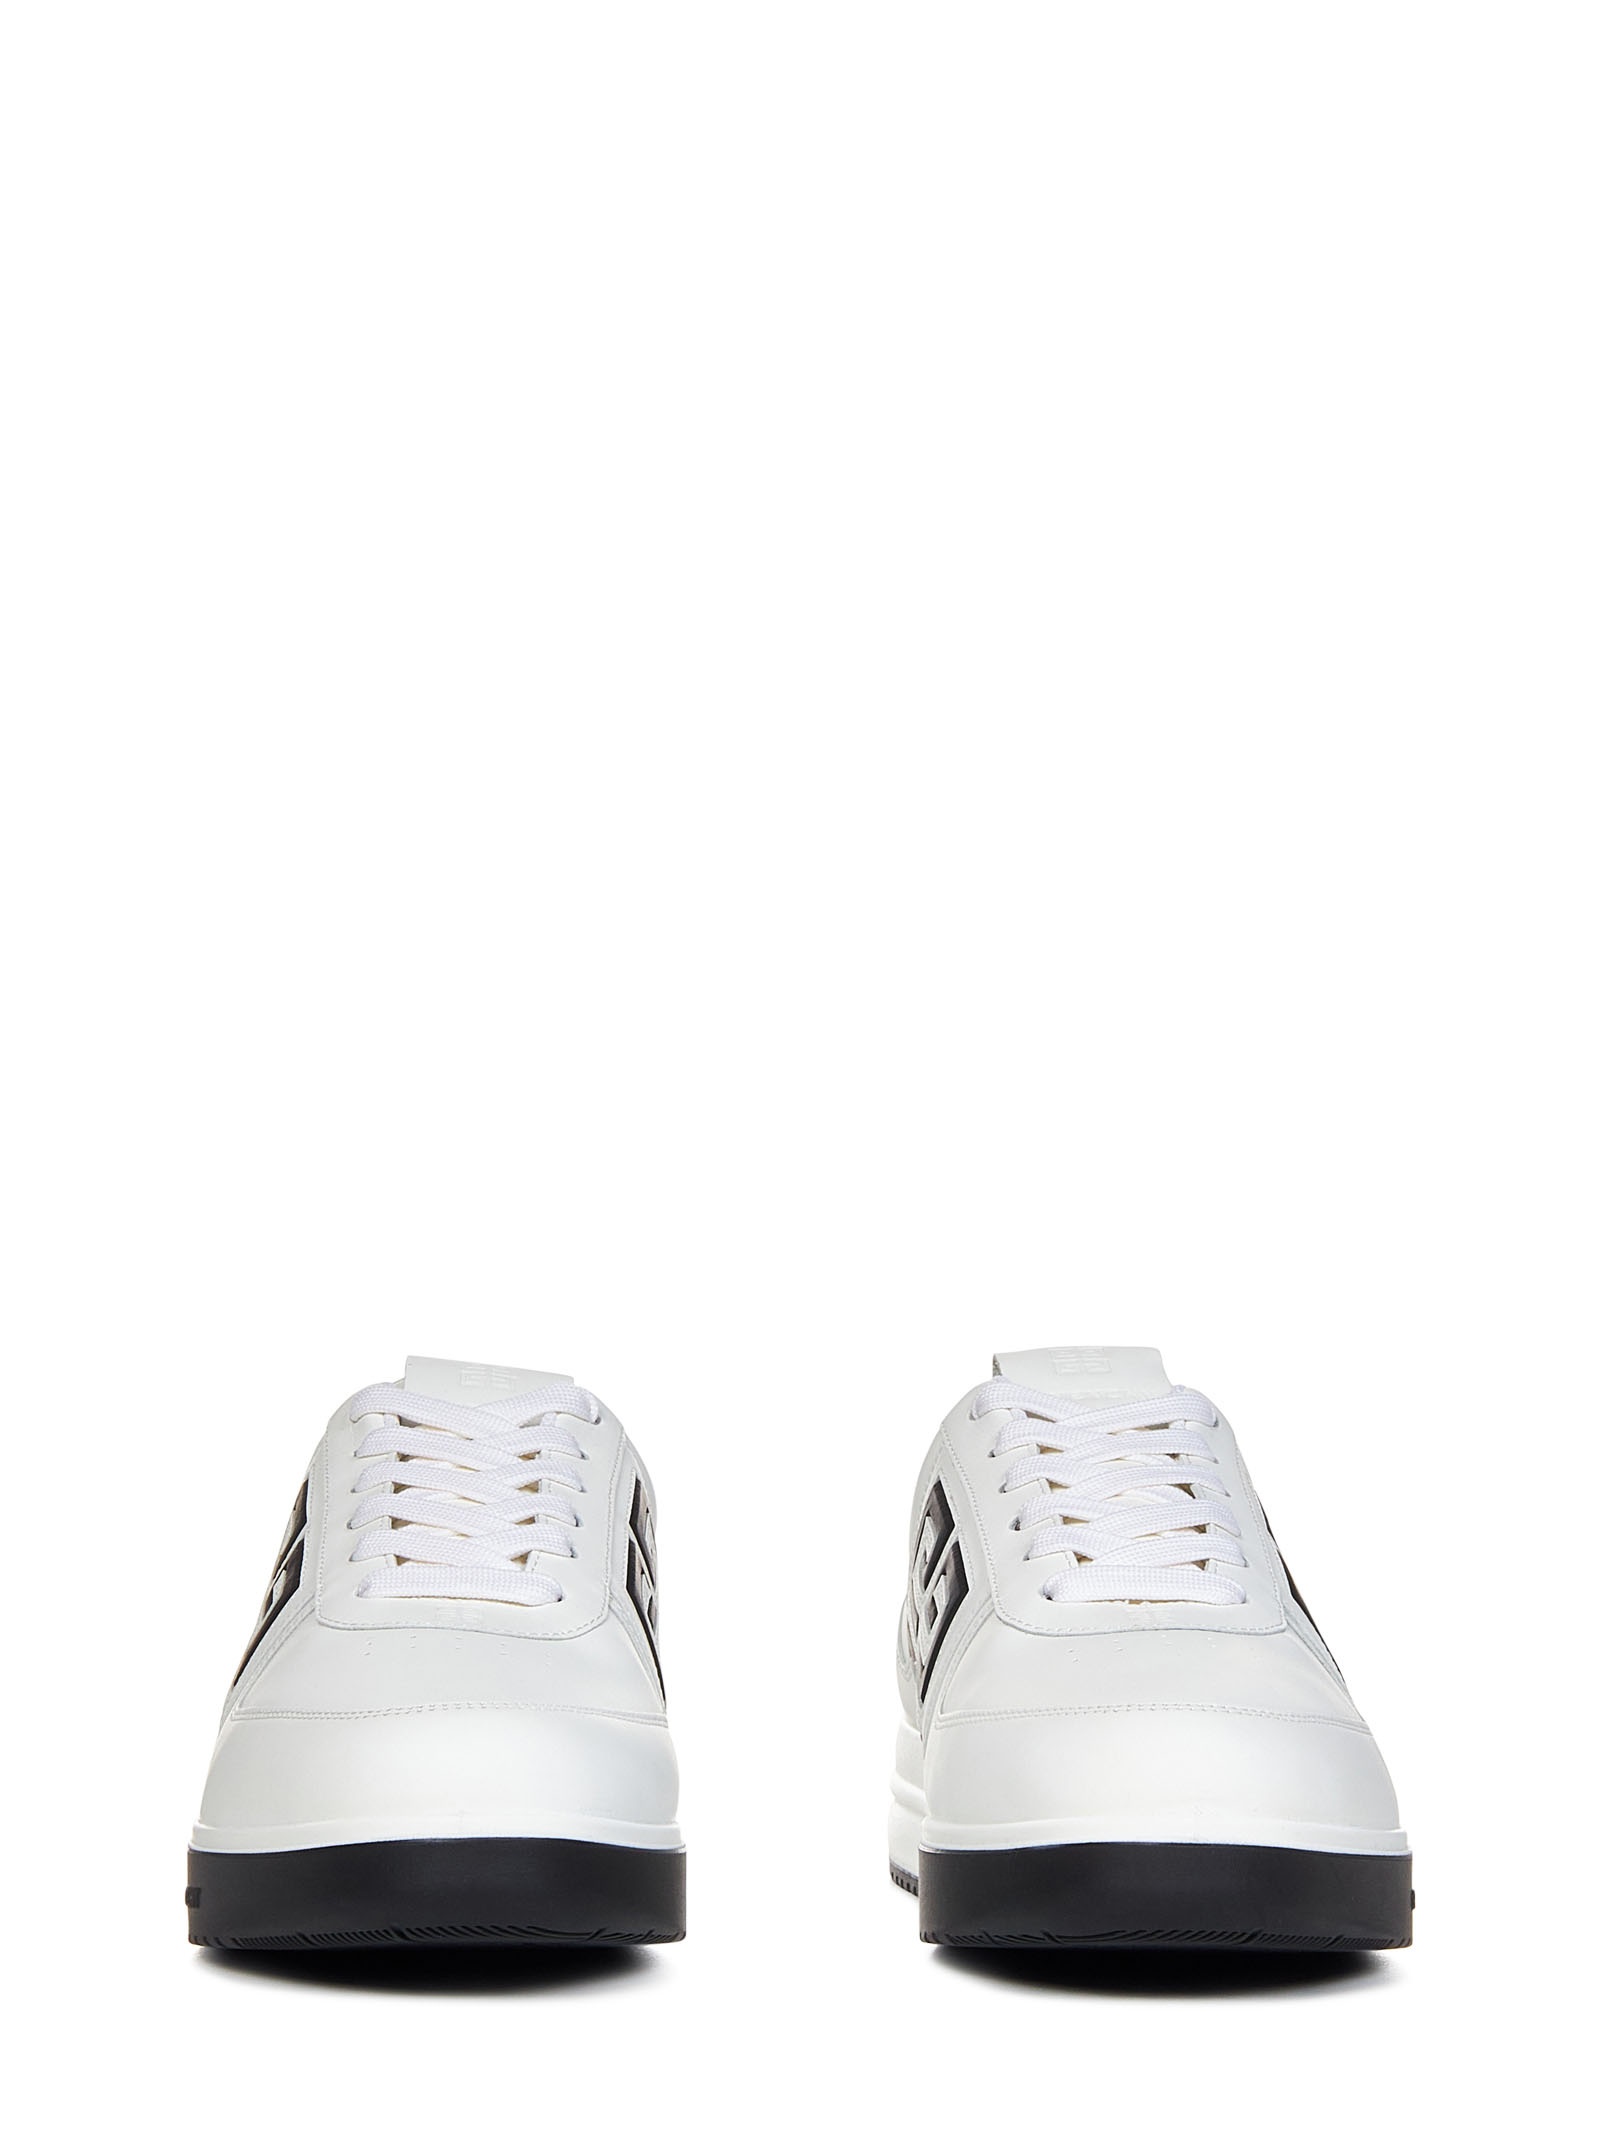 White calf leather low-top sneakers with embossed black 4G logo at side. - 2